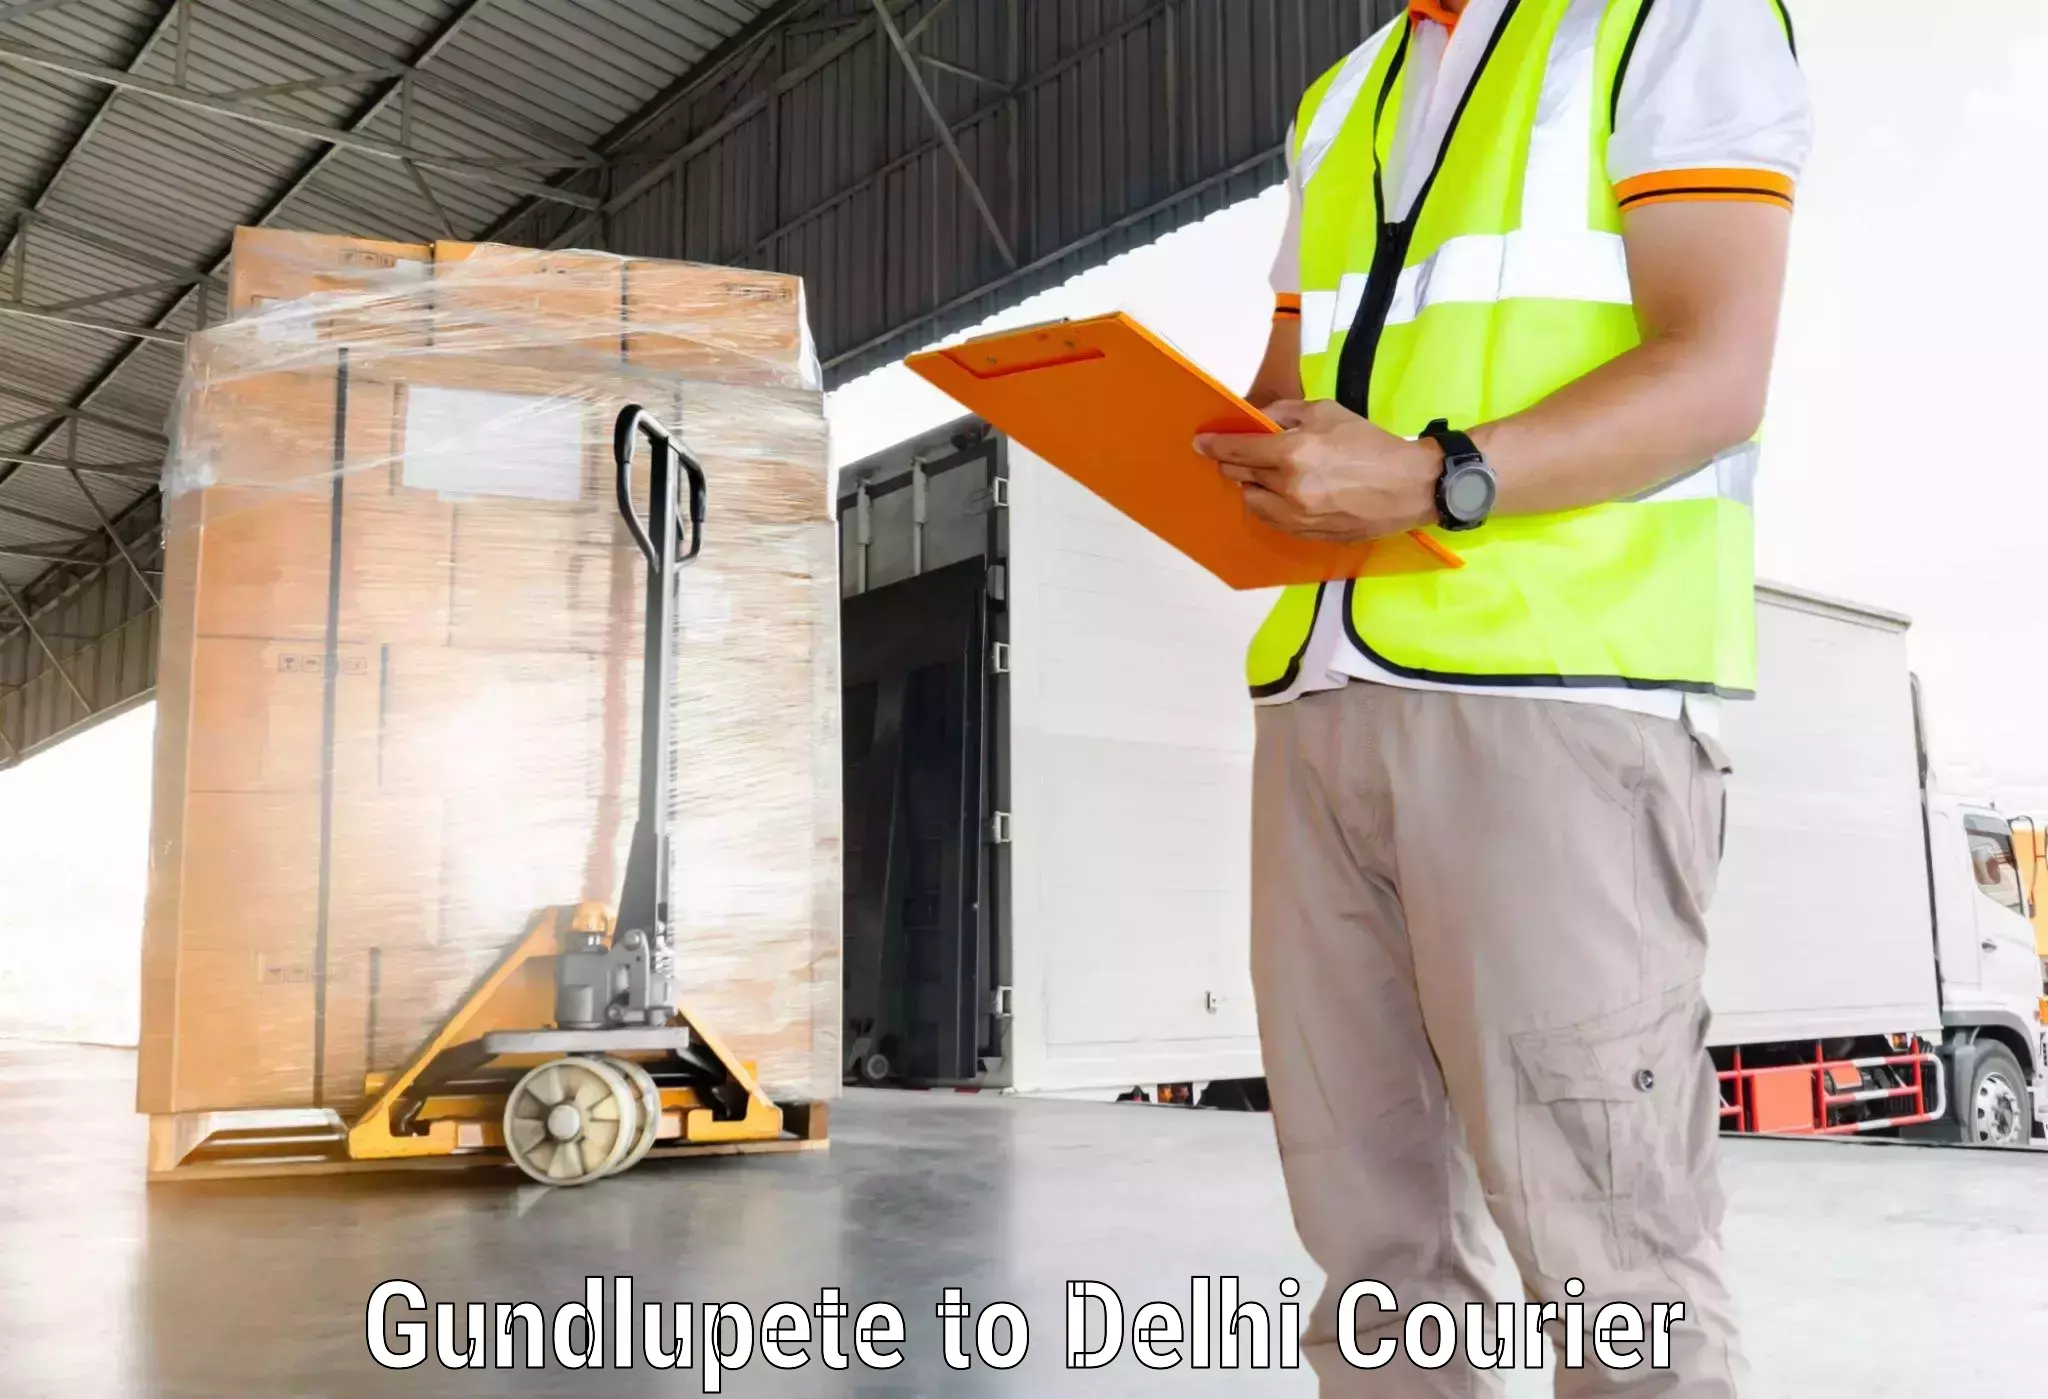 Round-the-clock parcel delivery Gundlupete to Delhi